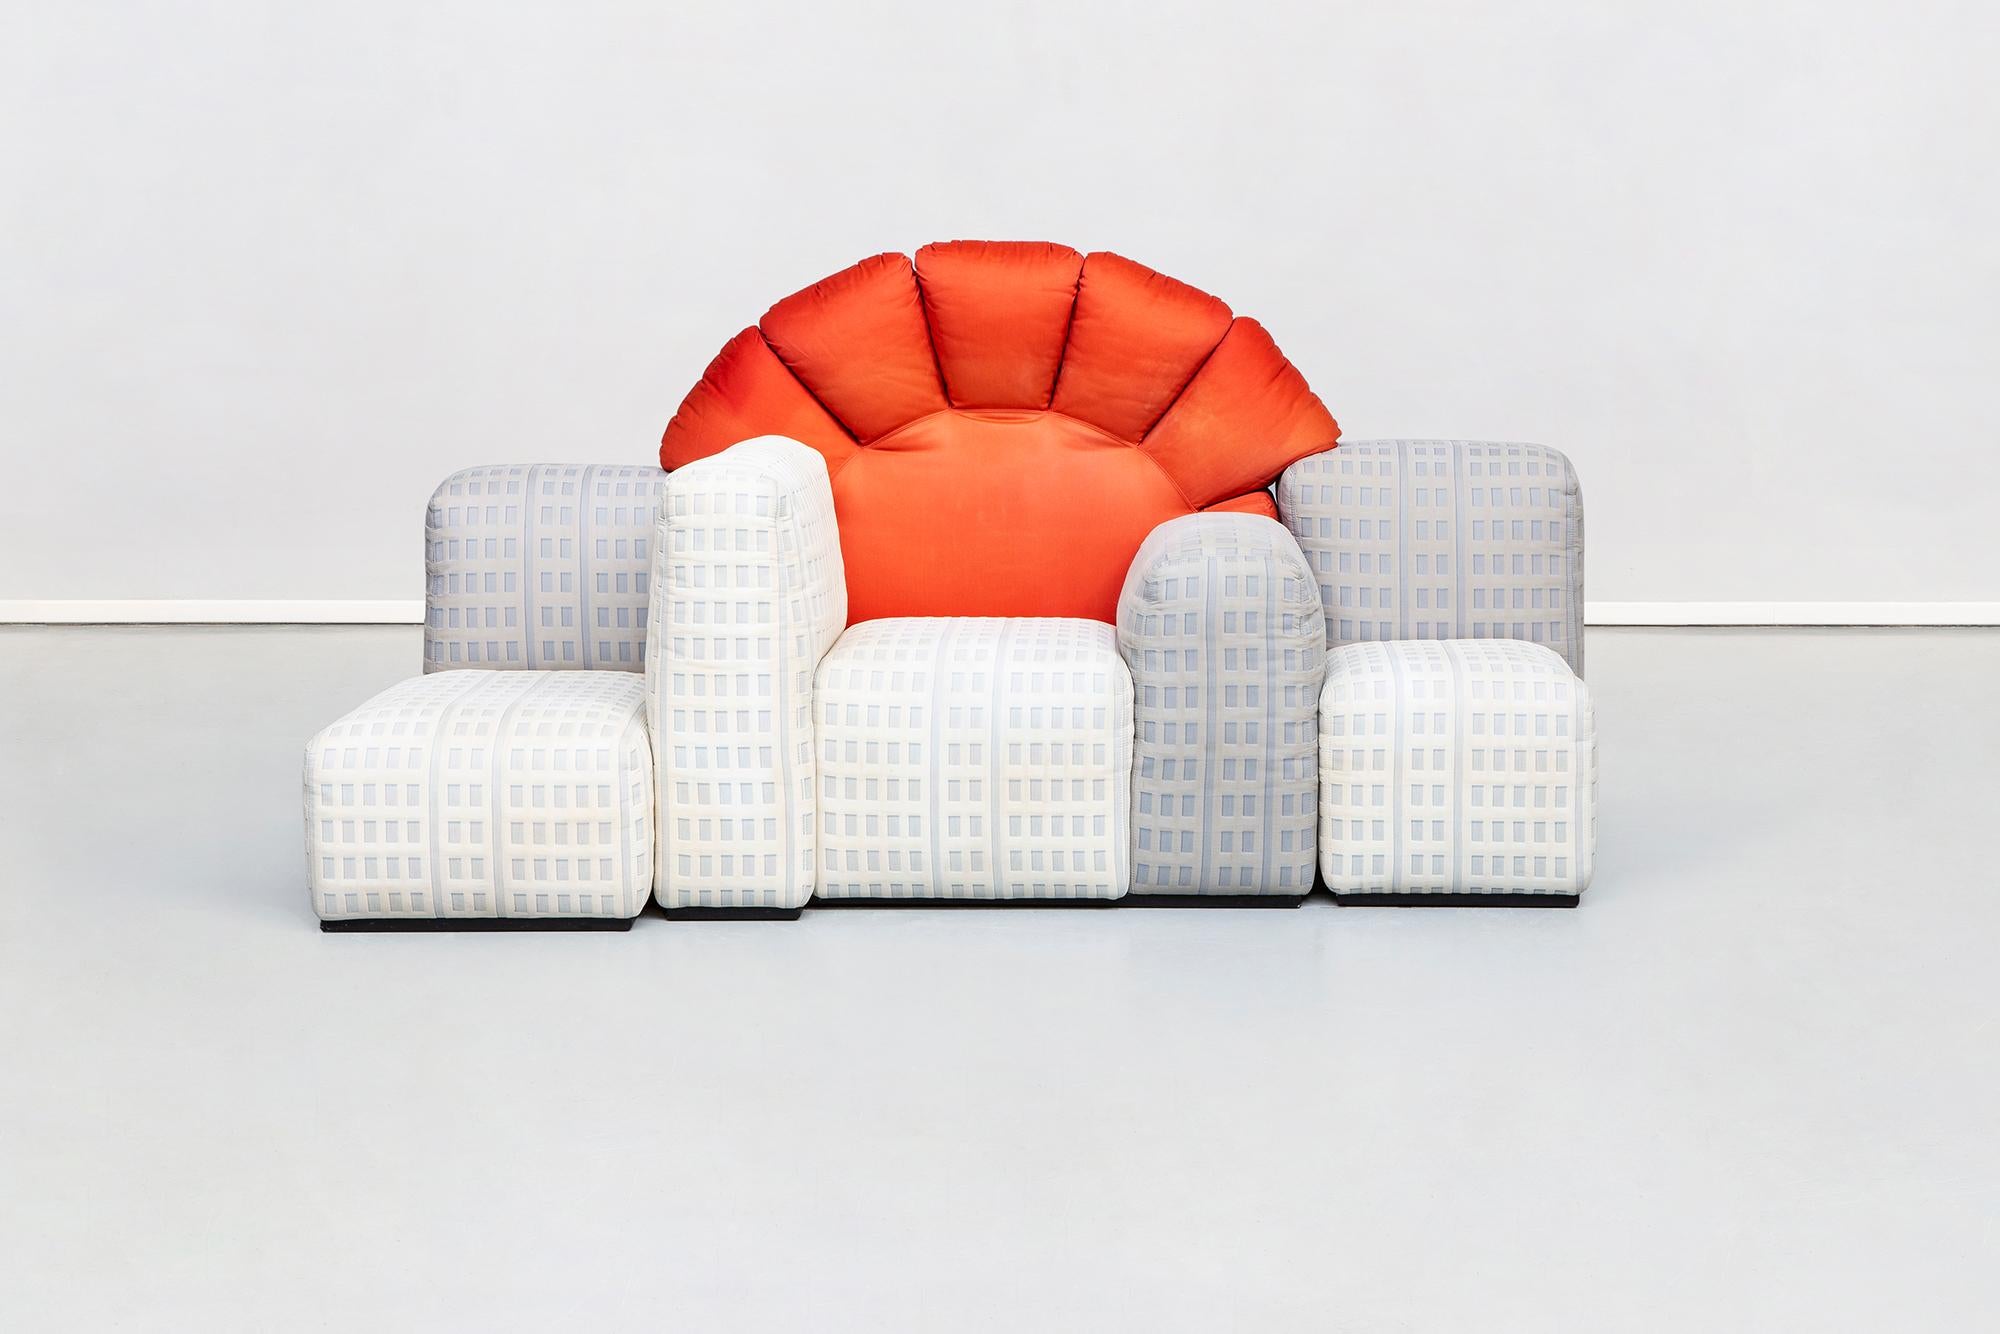 Tramonto a New York modular sofa designed by Gaetano Pesce for Cassina, 1984
This is an authentic masterpiece by the unconventional Italian designer Gaetano Pesce, from 1984, produced by Cassina in only 42 pieces, not more available since 1992.